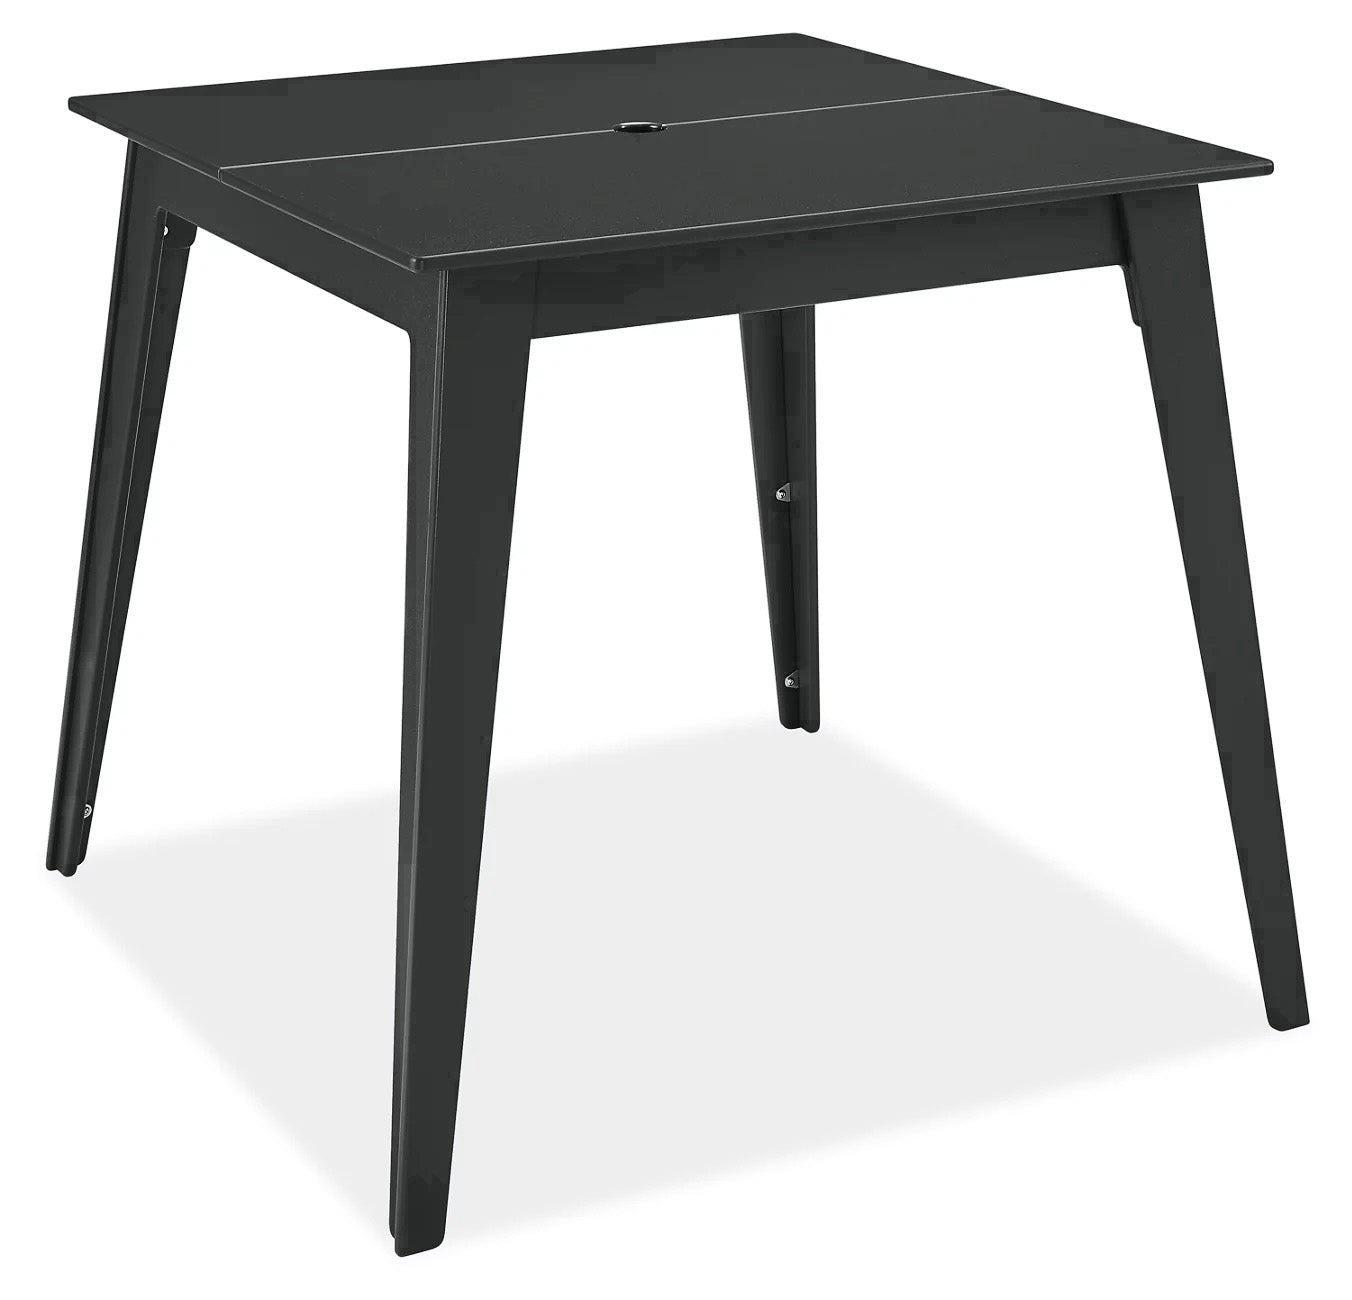 40" Square Counter Table, Employee Sale